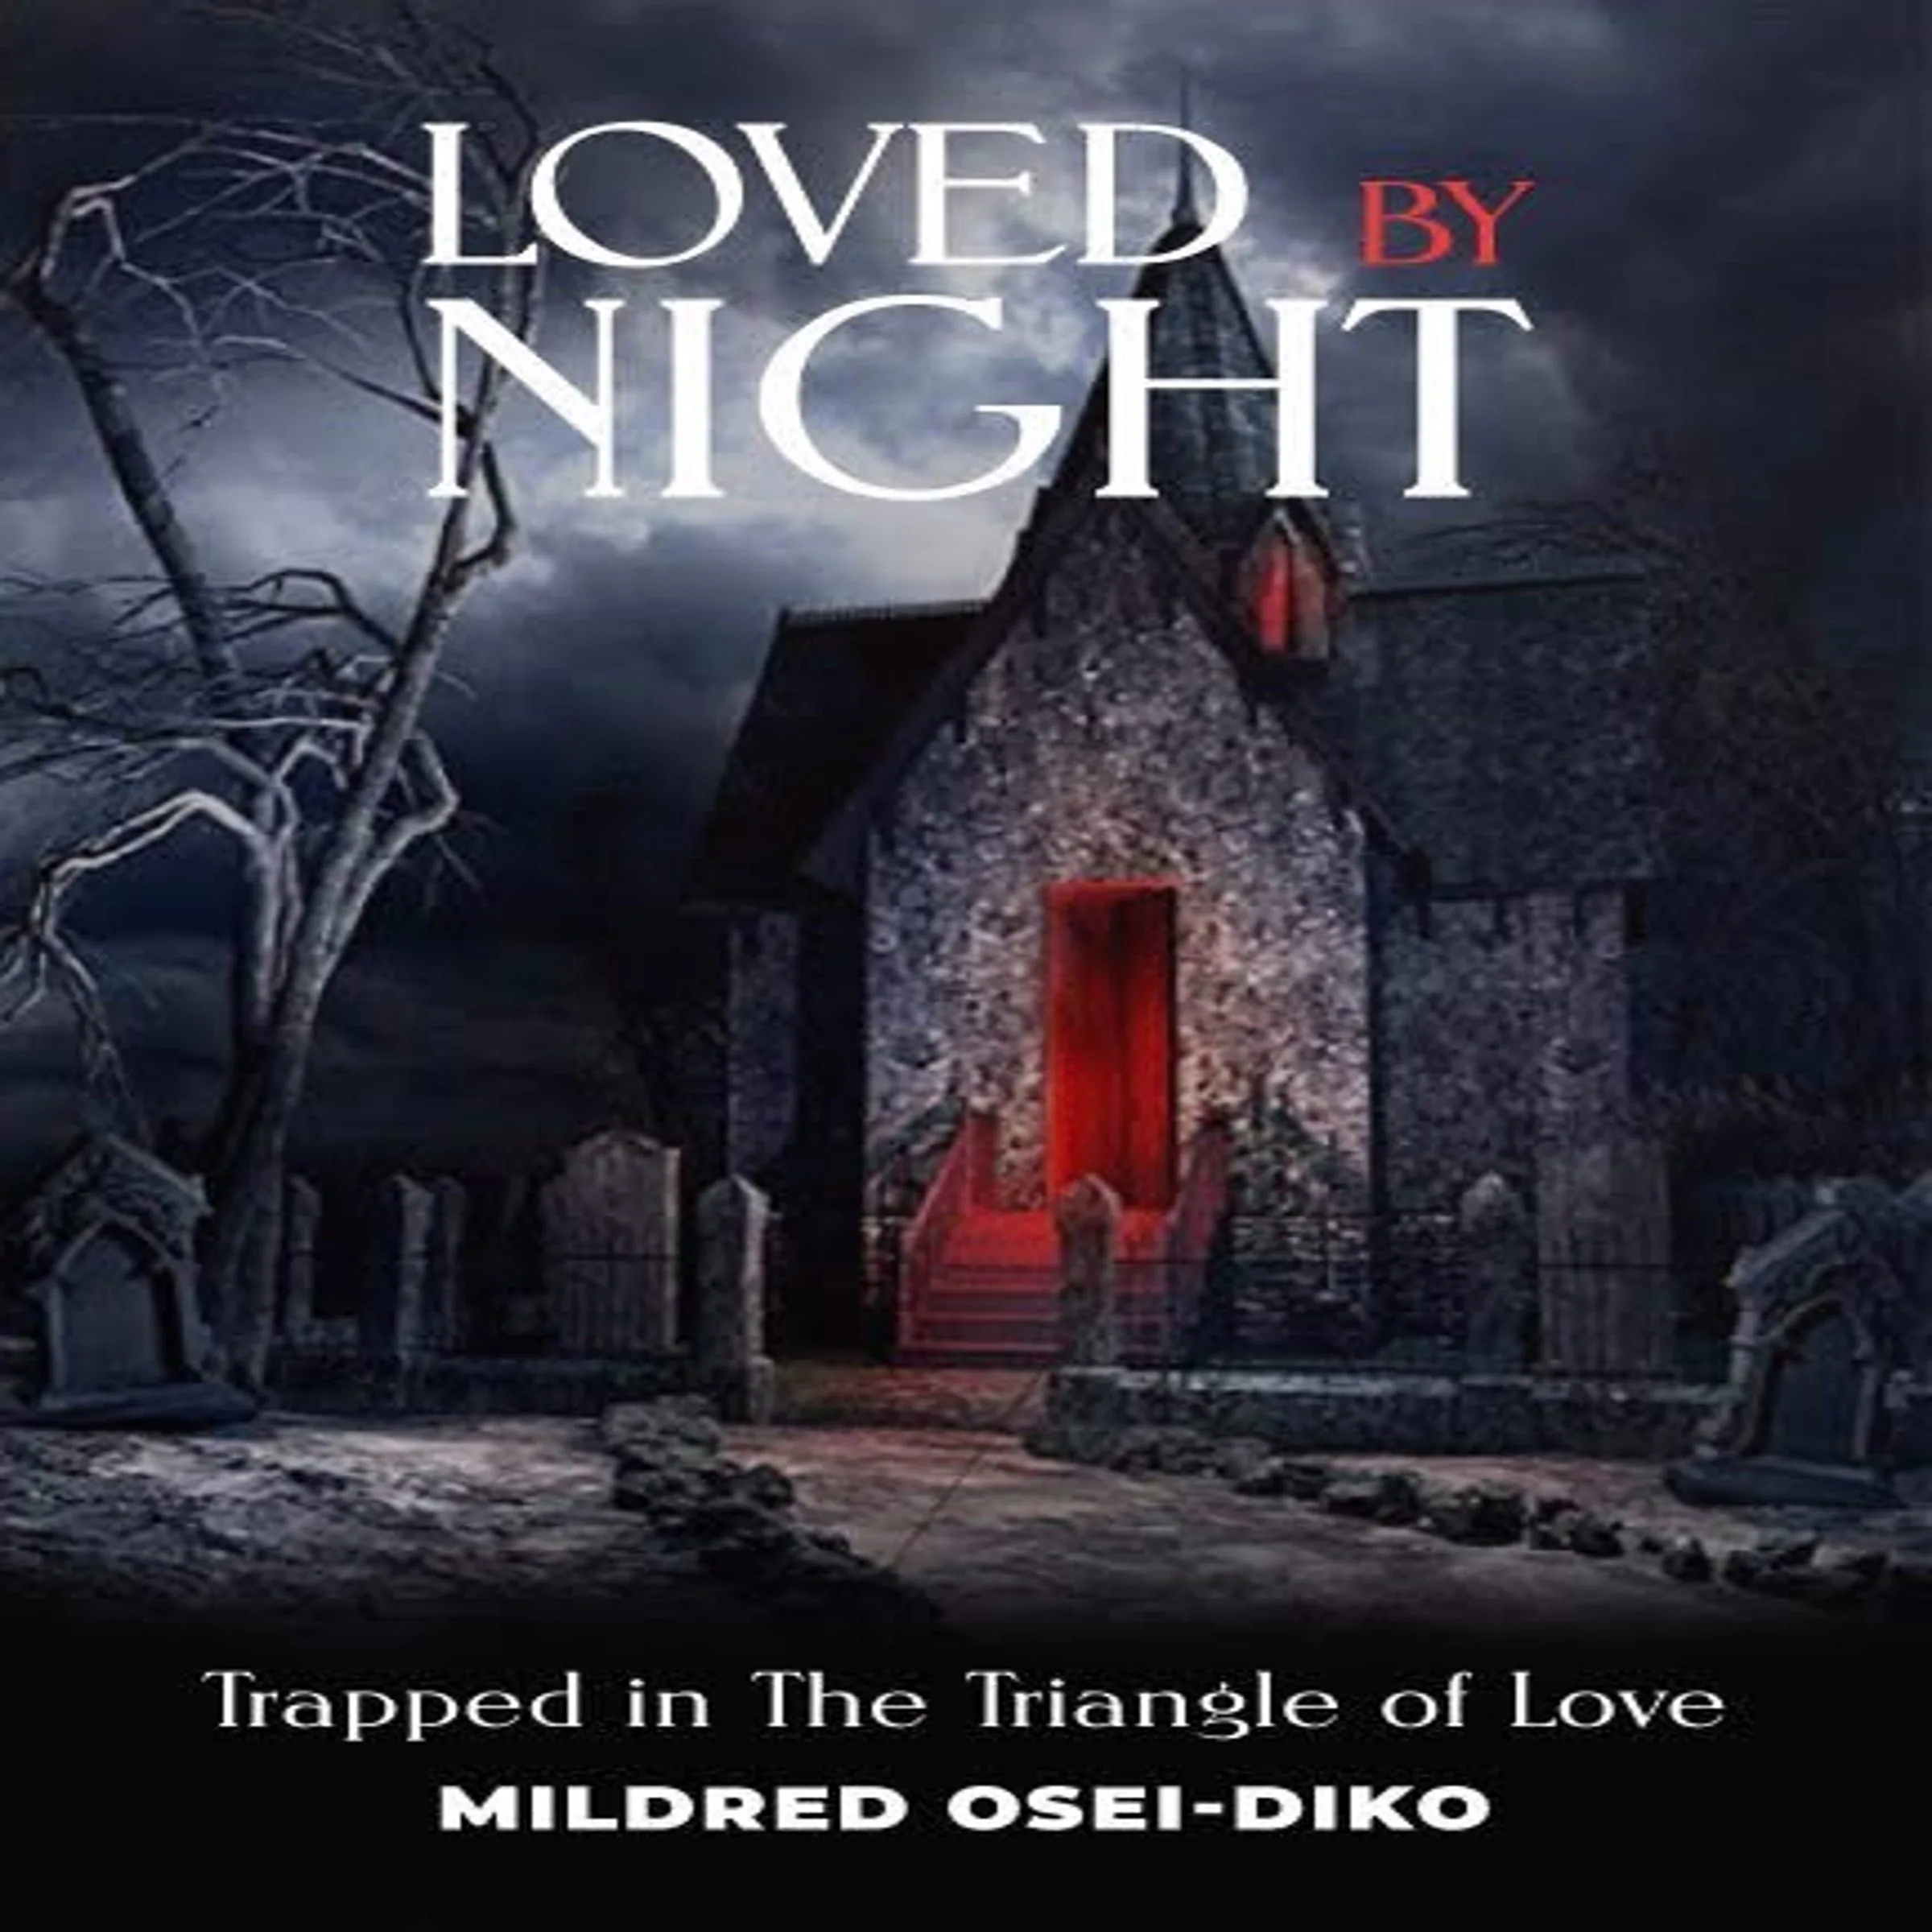 Loved By Night by MiLDRED OSEI-DIKO Audiobook